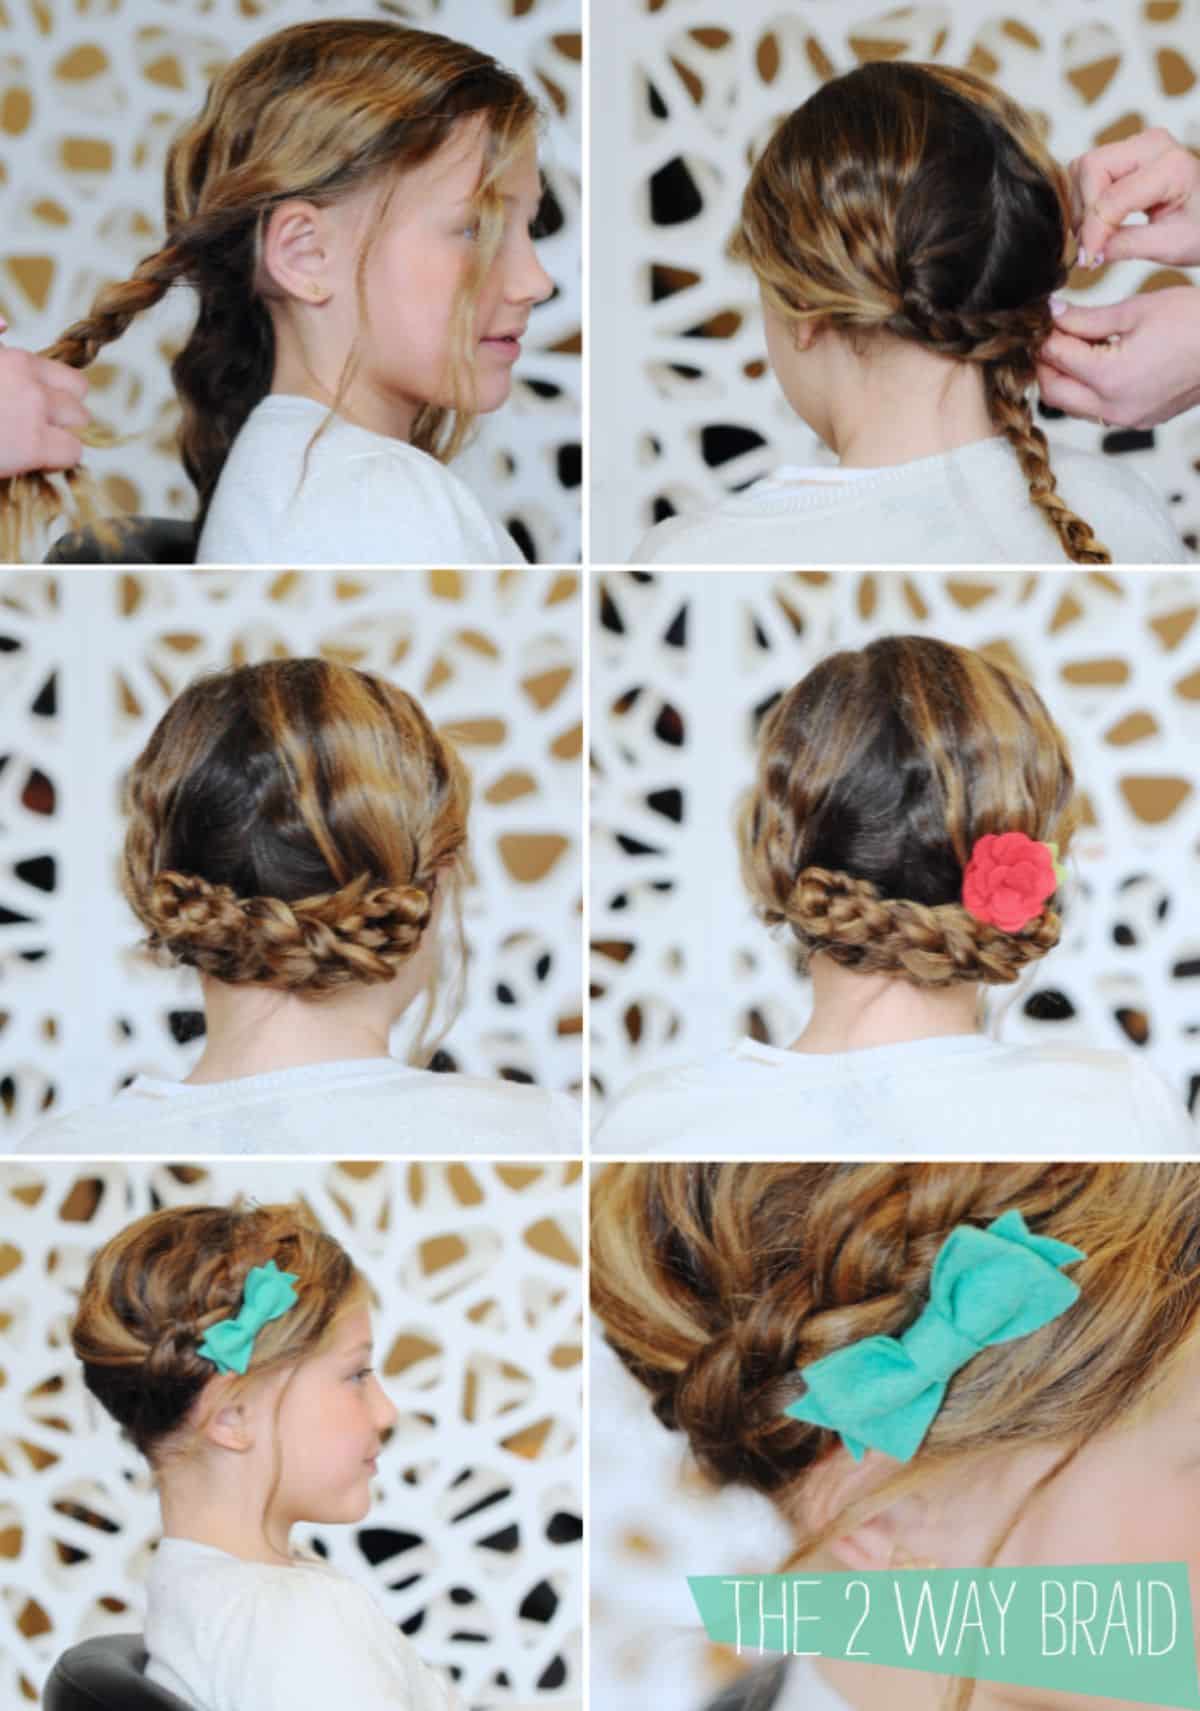 6 images of girl getting different types of ponytails.